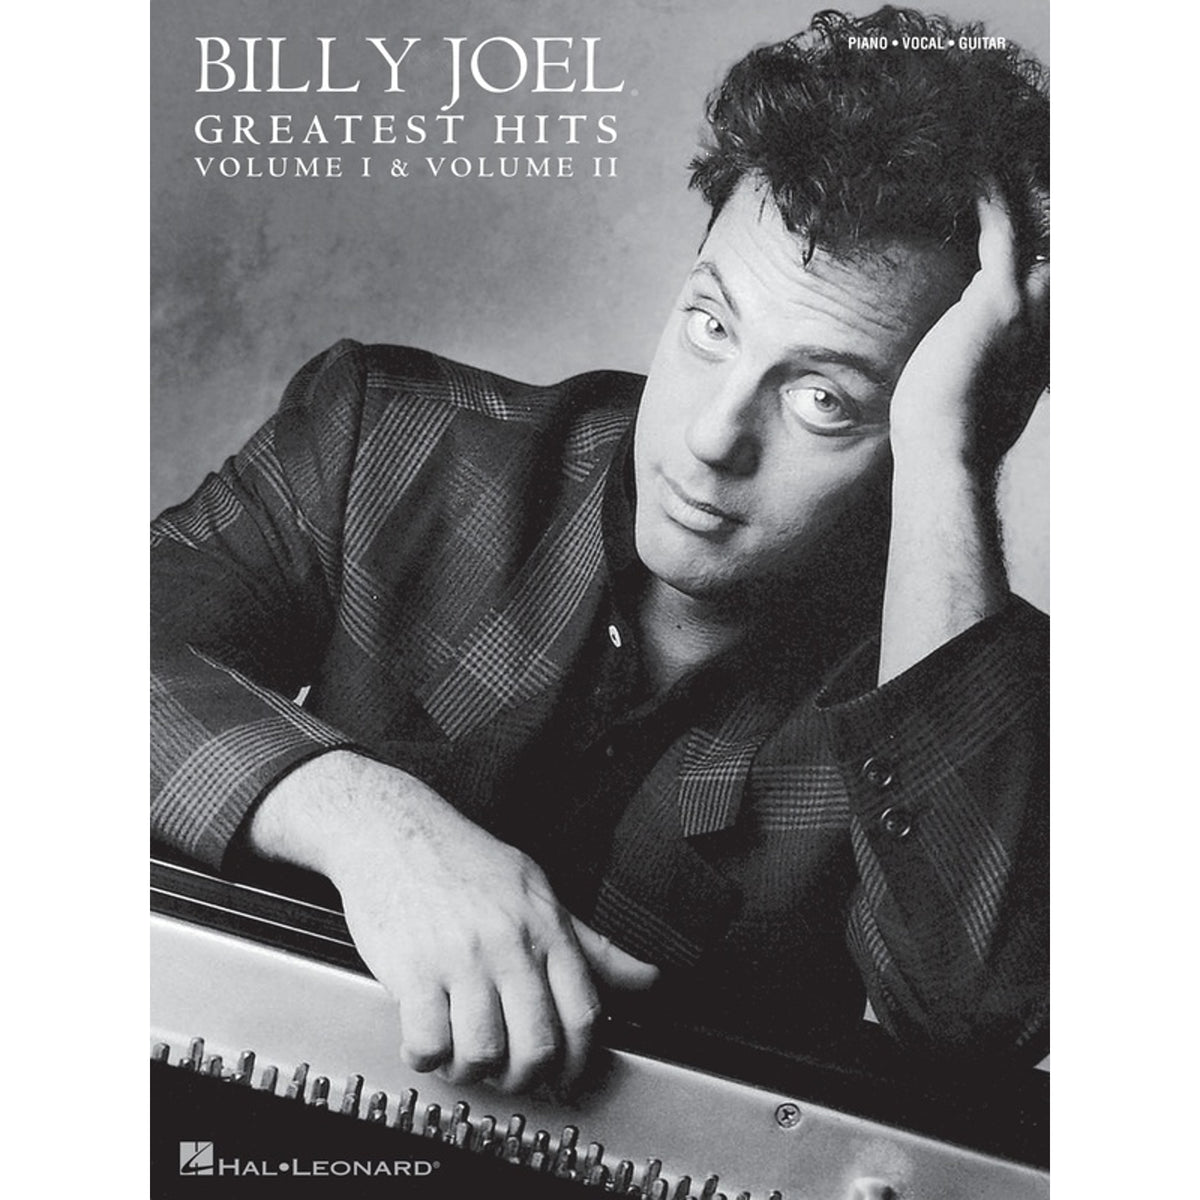 Billy Joel Greatest Hits Volume 1 and 2